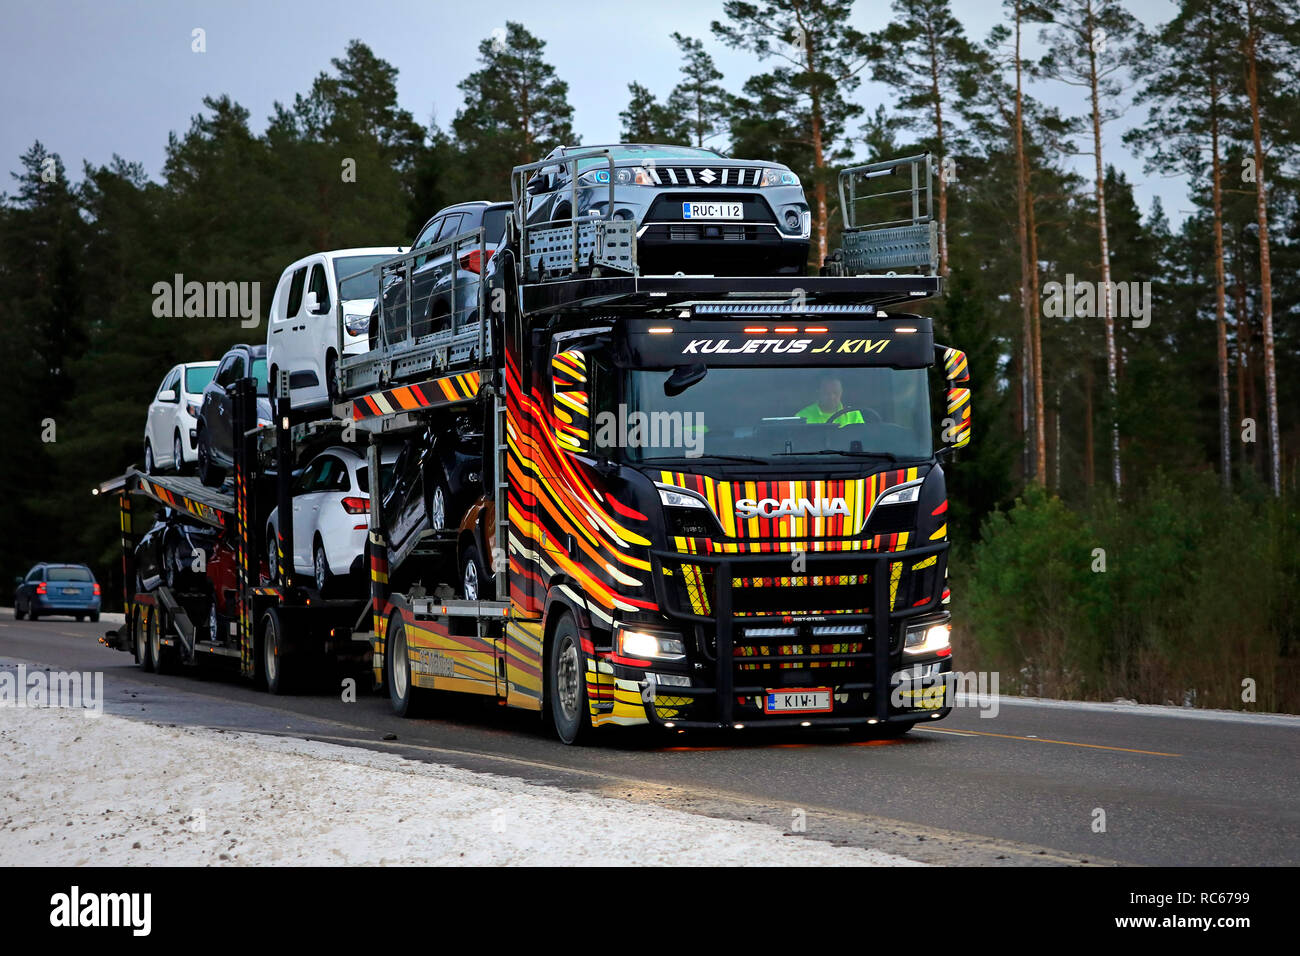 Salo, Finland - January 6, 2019: Spectacularly customised car carrier Scania R650 of Kuljetus J. Kivi hauls vehicles along road on a winter afternoon. Stock Photo